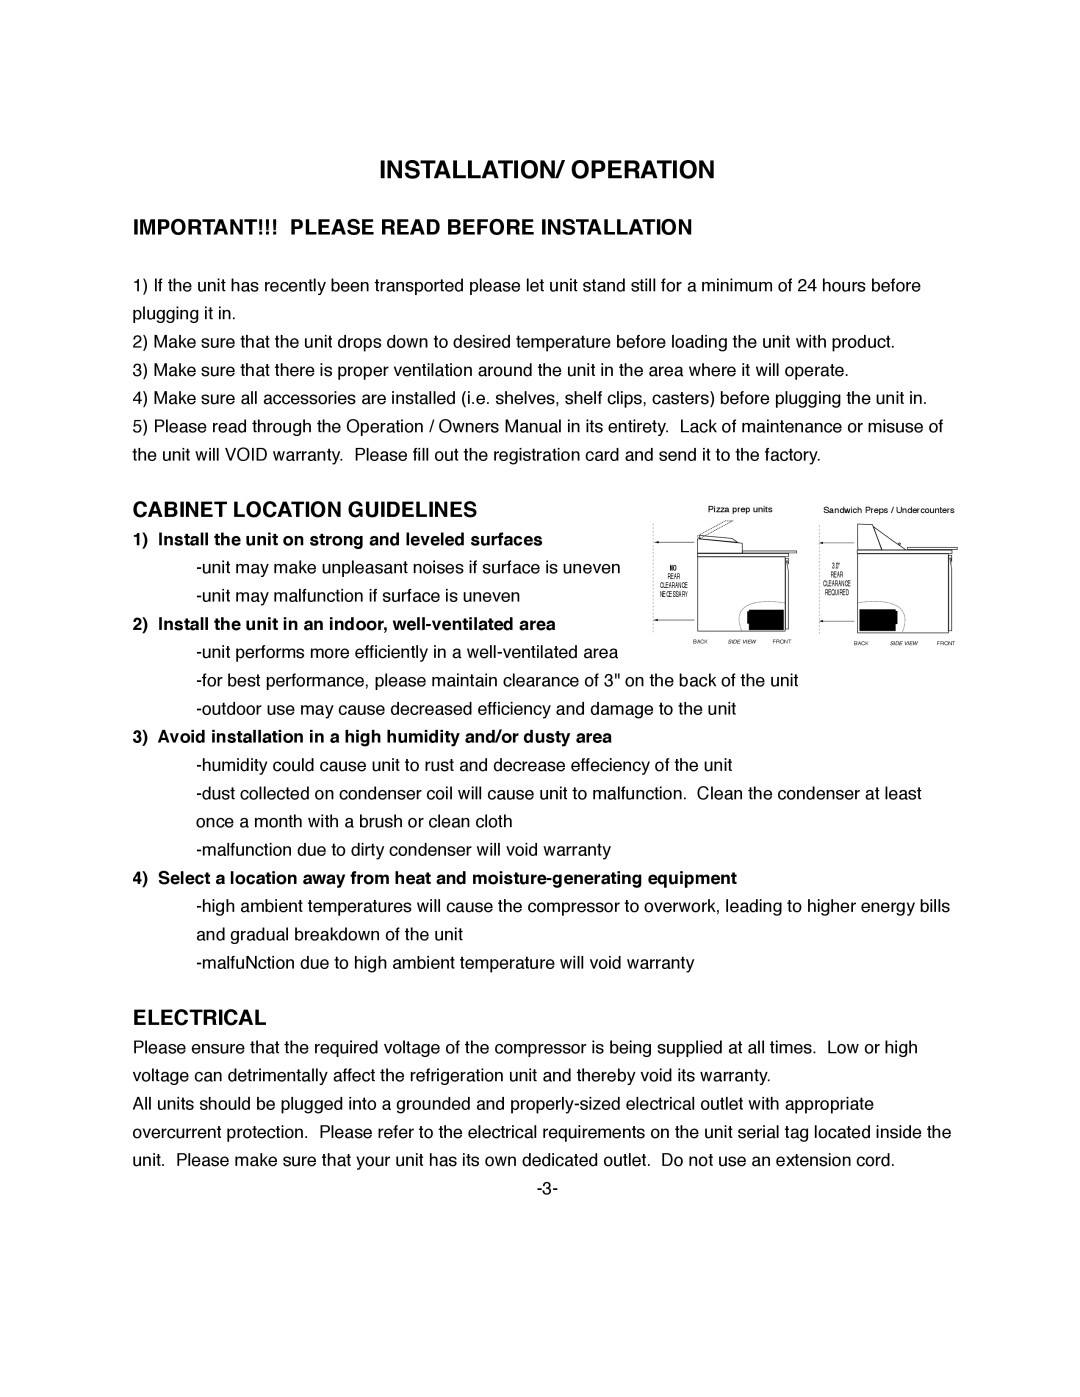 ColdTech U1BRR-06S Installation/ Operation, Important!!! Please Read Before Installation, Cabinet Location Guidelines 